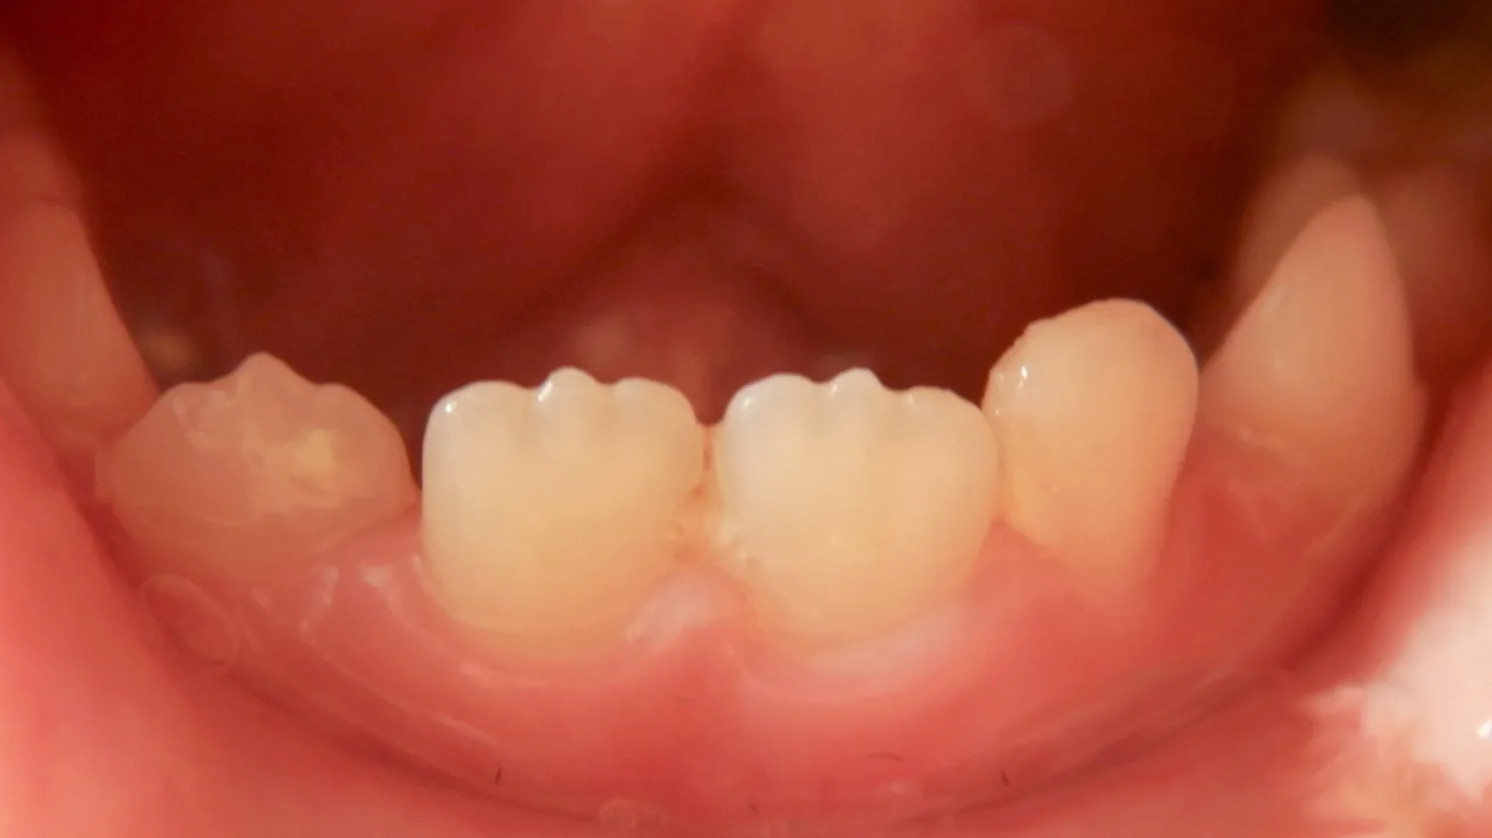 Bumps on the New Adult Teeth